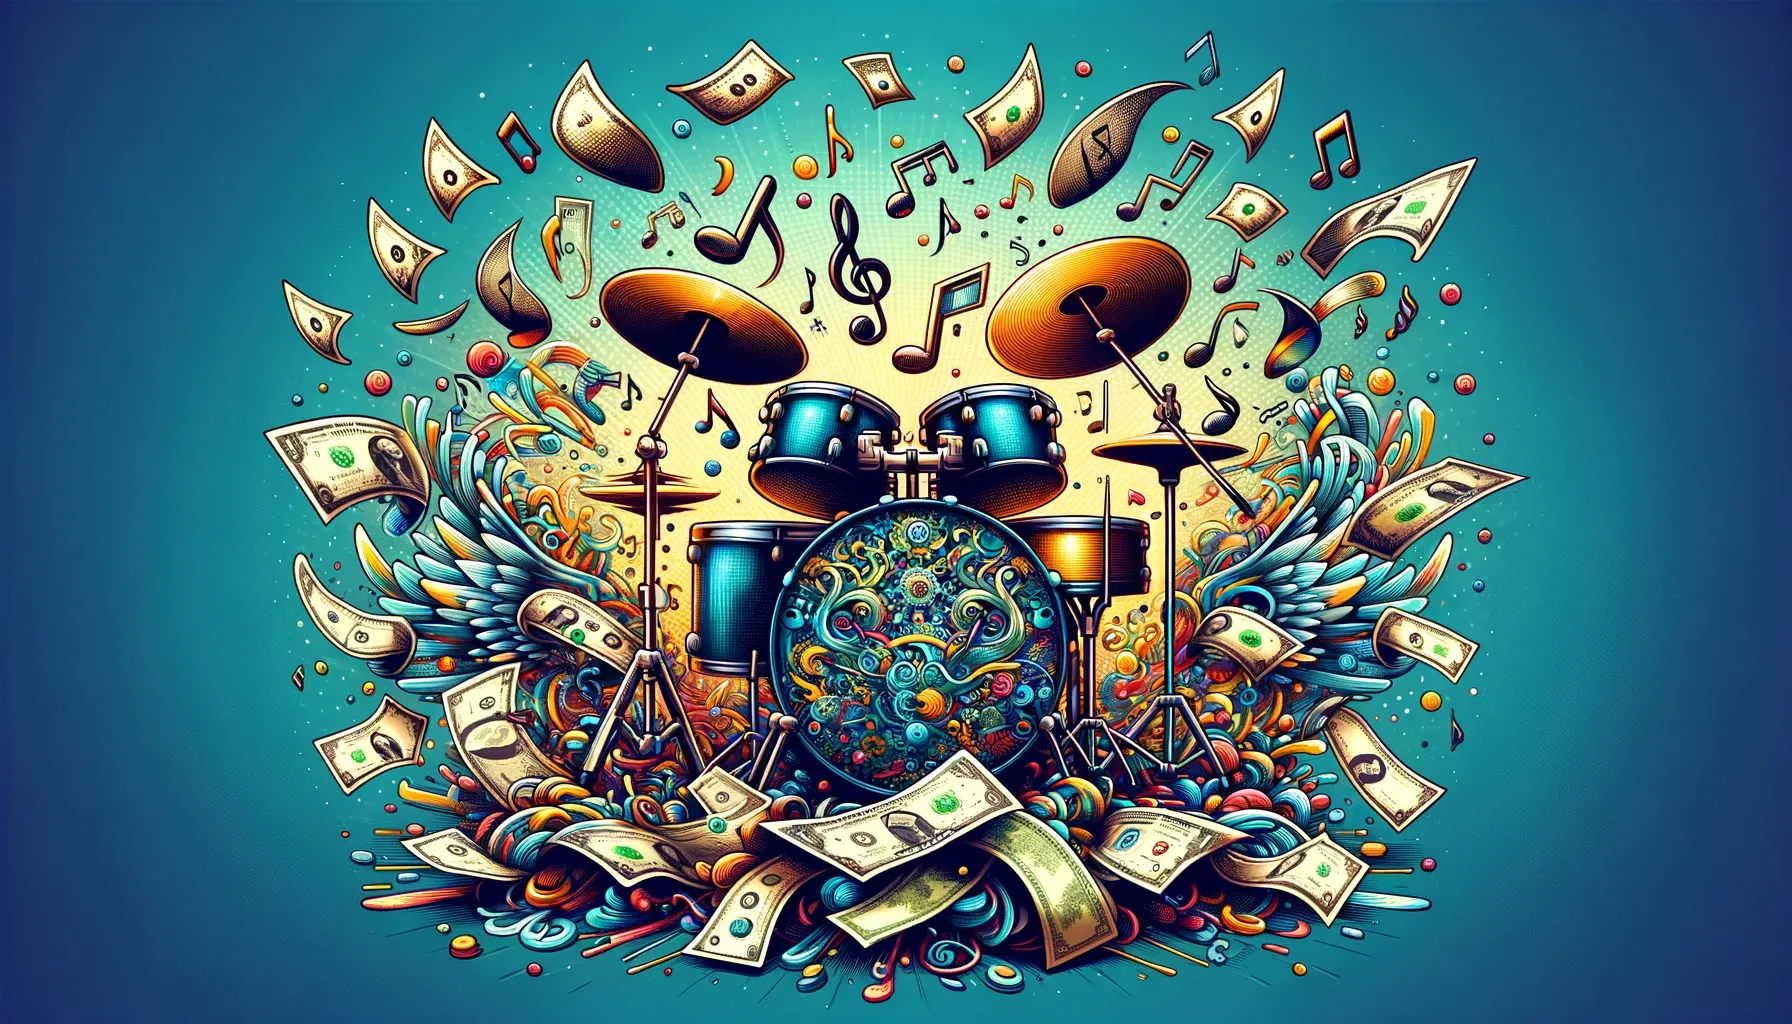 Create a dynamic 16:9 image featuring a detailed drum set at the center, surrounded by an array of musical notes and cash bills, both adorned with small wings to suggest they are flying around the drum set in a lively and rhythmic dance. The image should capture the essence of music and financial success merging, with the flying notes and cash creating a whimsical and energetic atmosphere. The color scheme should be vibrant and engaging, enhancing the musical theme and the concept of financial gain in an artistic and creative setting.